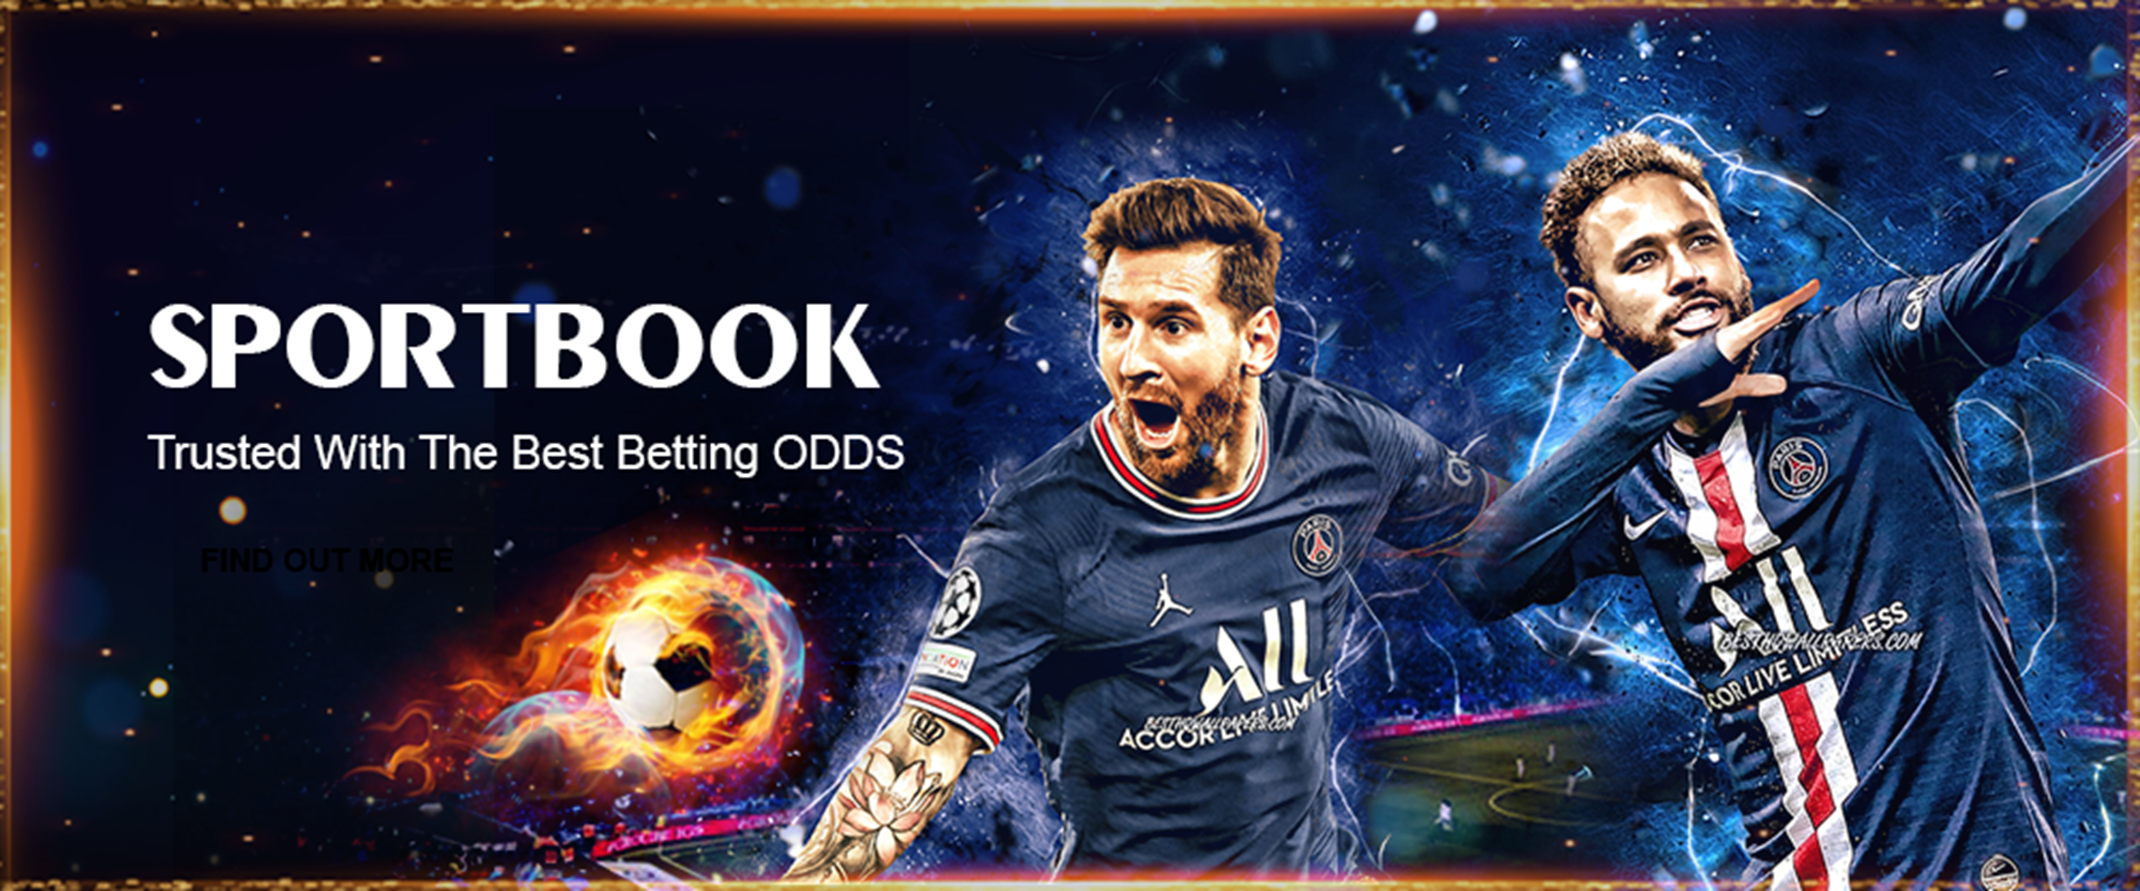 Making More Successful Bets in 2023 - Sports Betting Tips